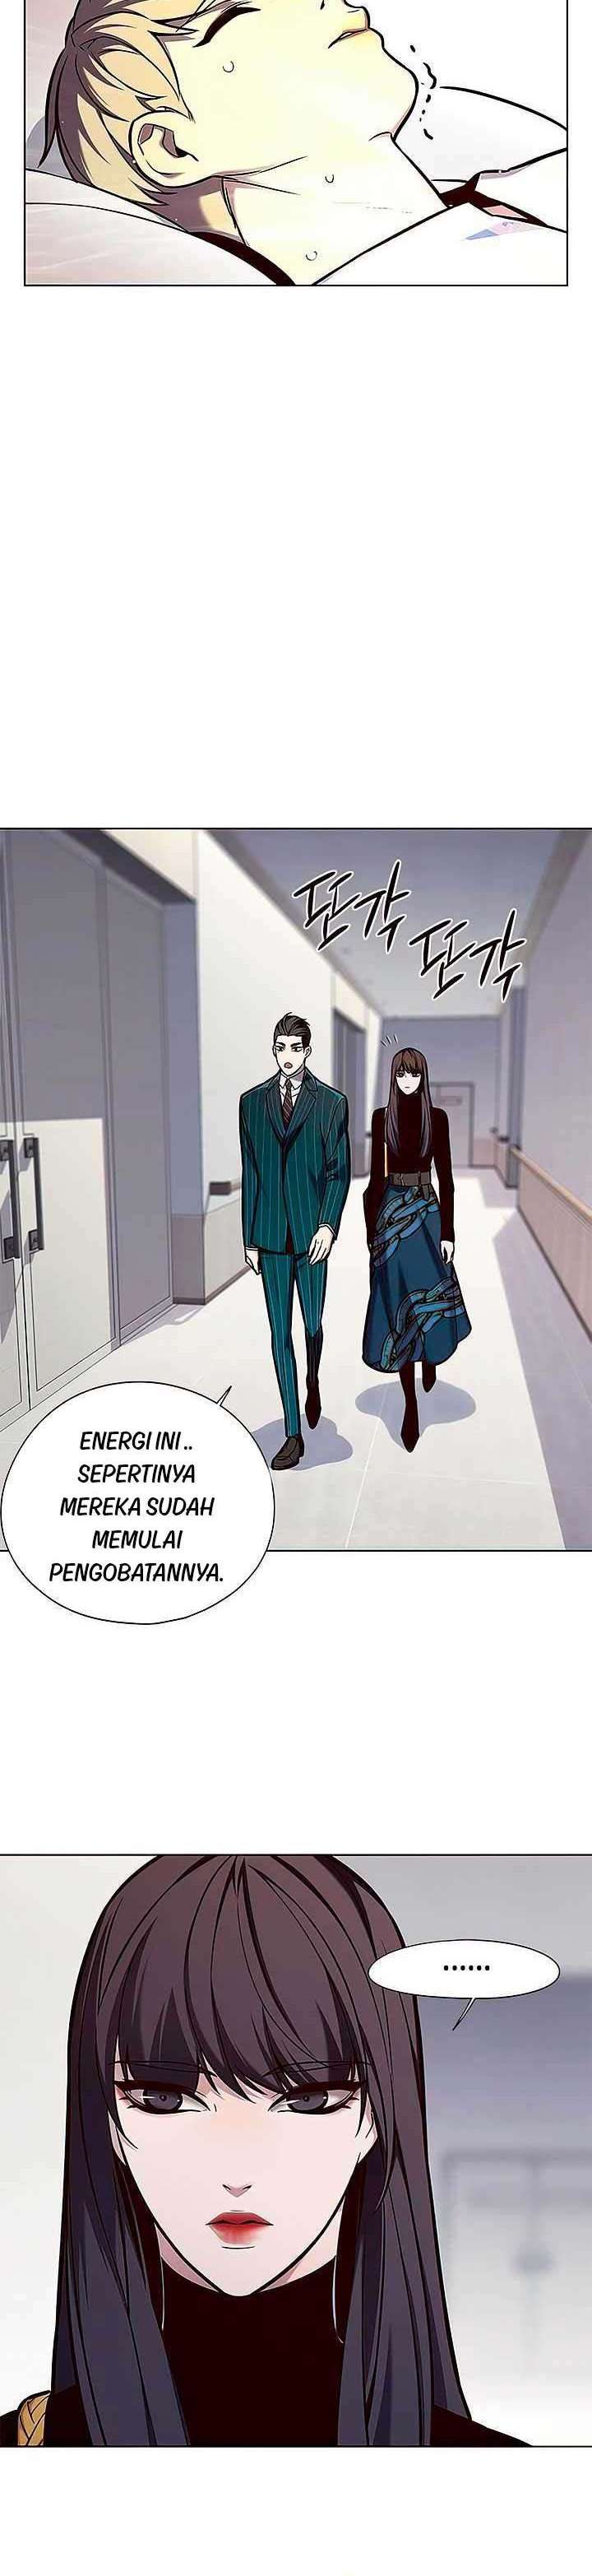 Eleceed Chapter  142